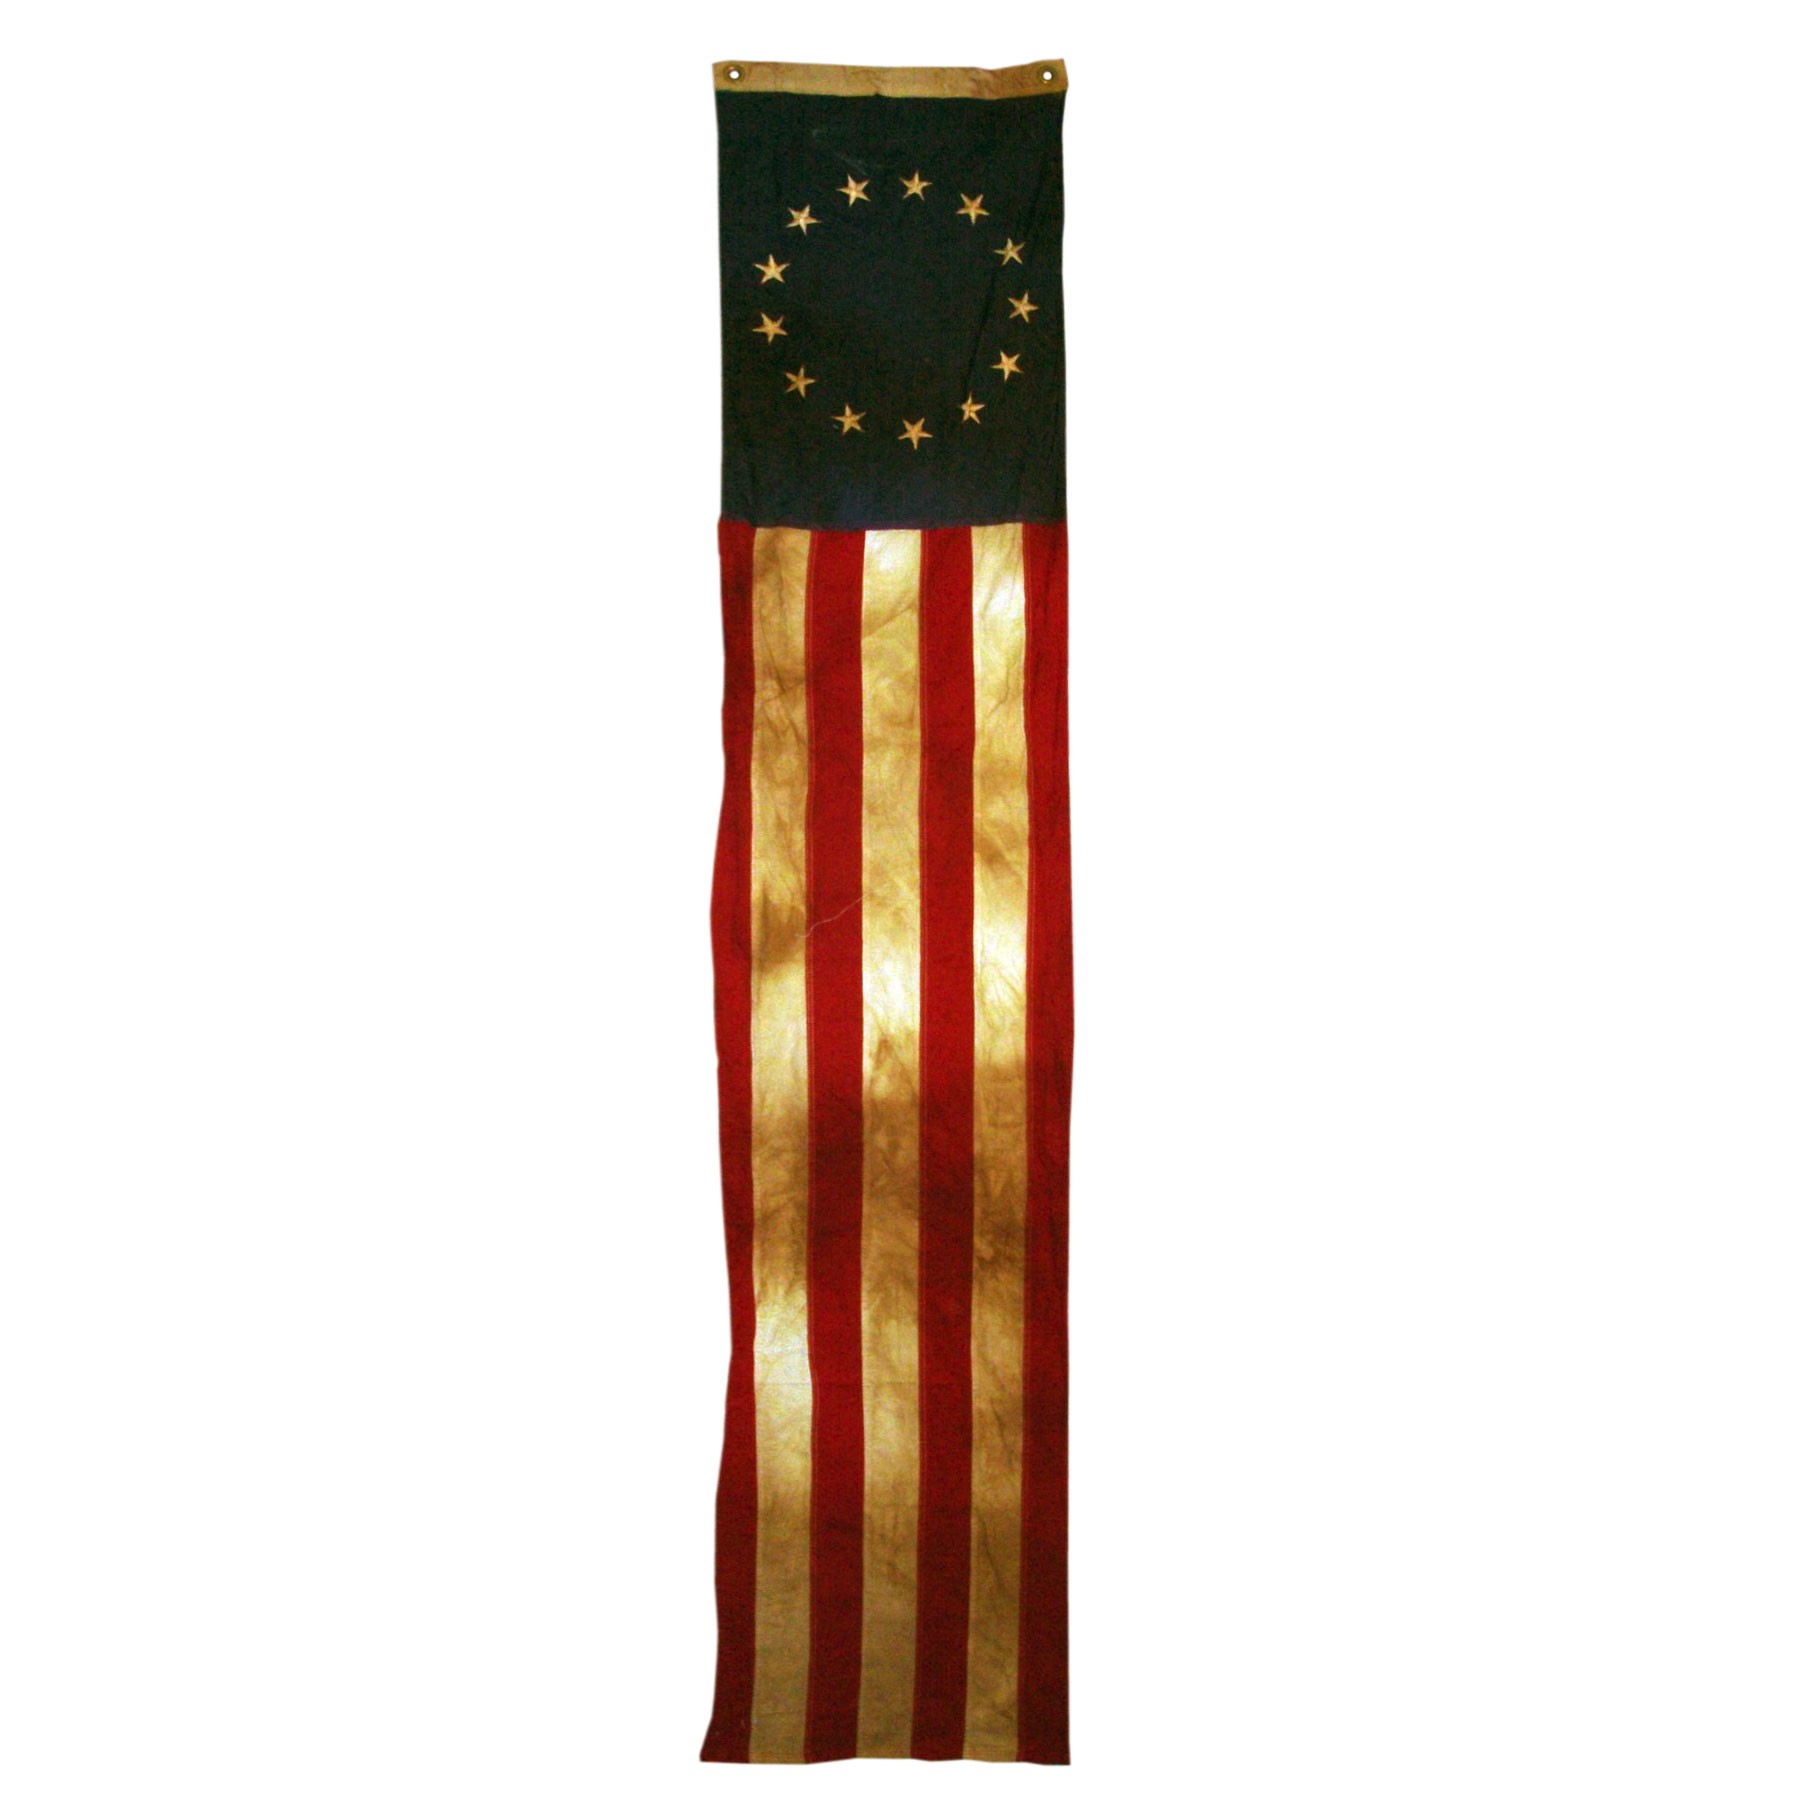 13-Star 20in x 8ft Sewn Cotton Flag Pull Down Heritage Series by Valley Forge